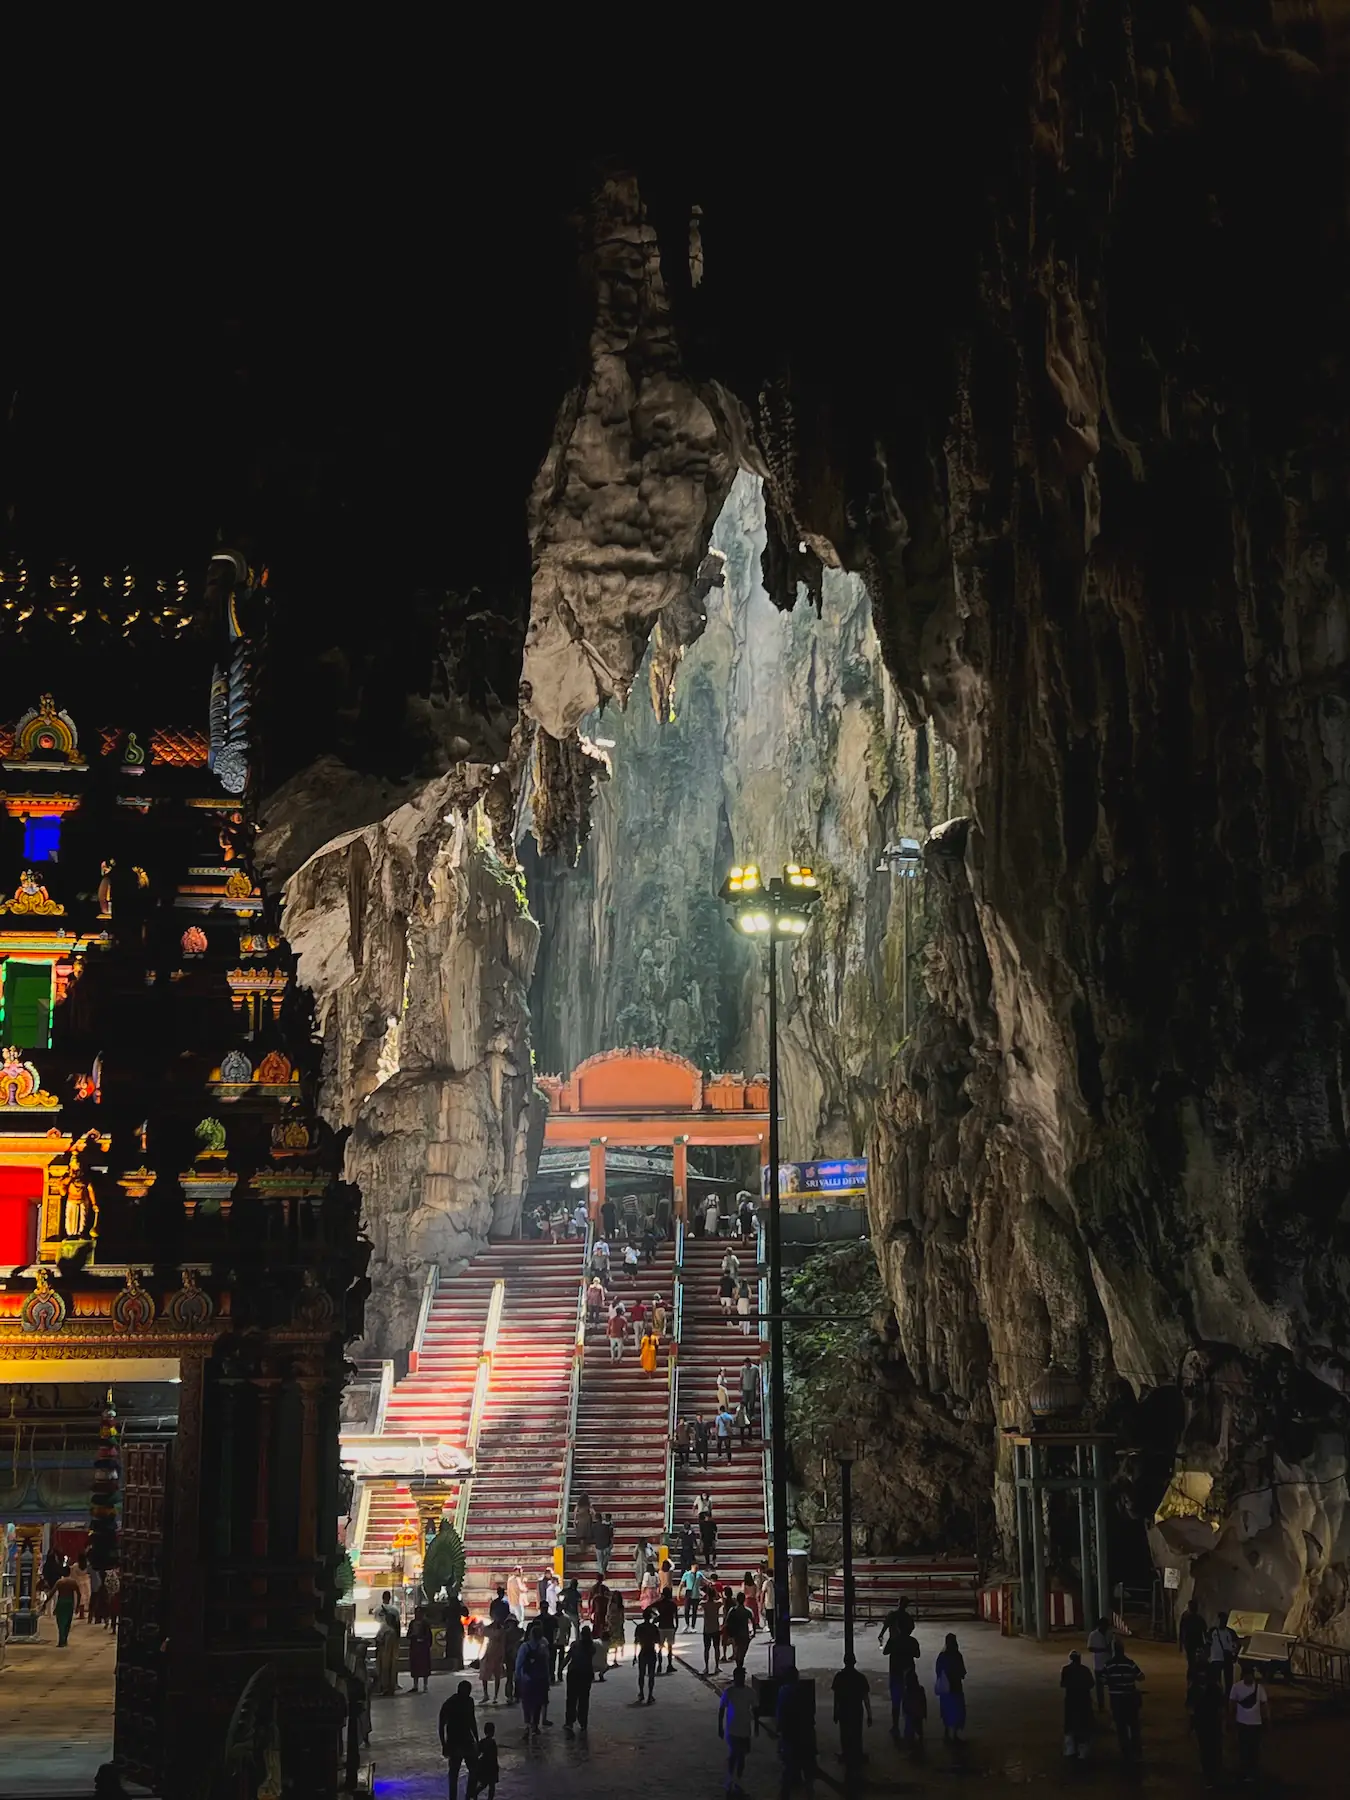 Inside of Batu Caves with sunlight shining through opening in ceiling